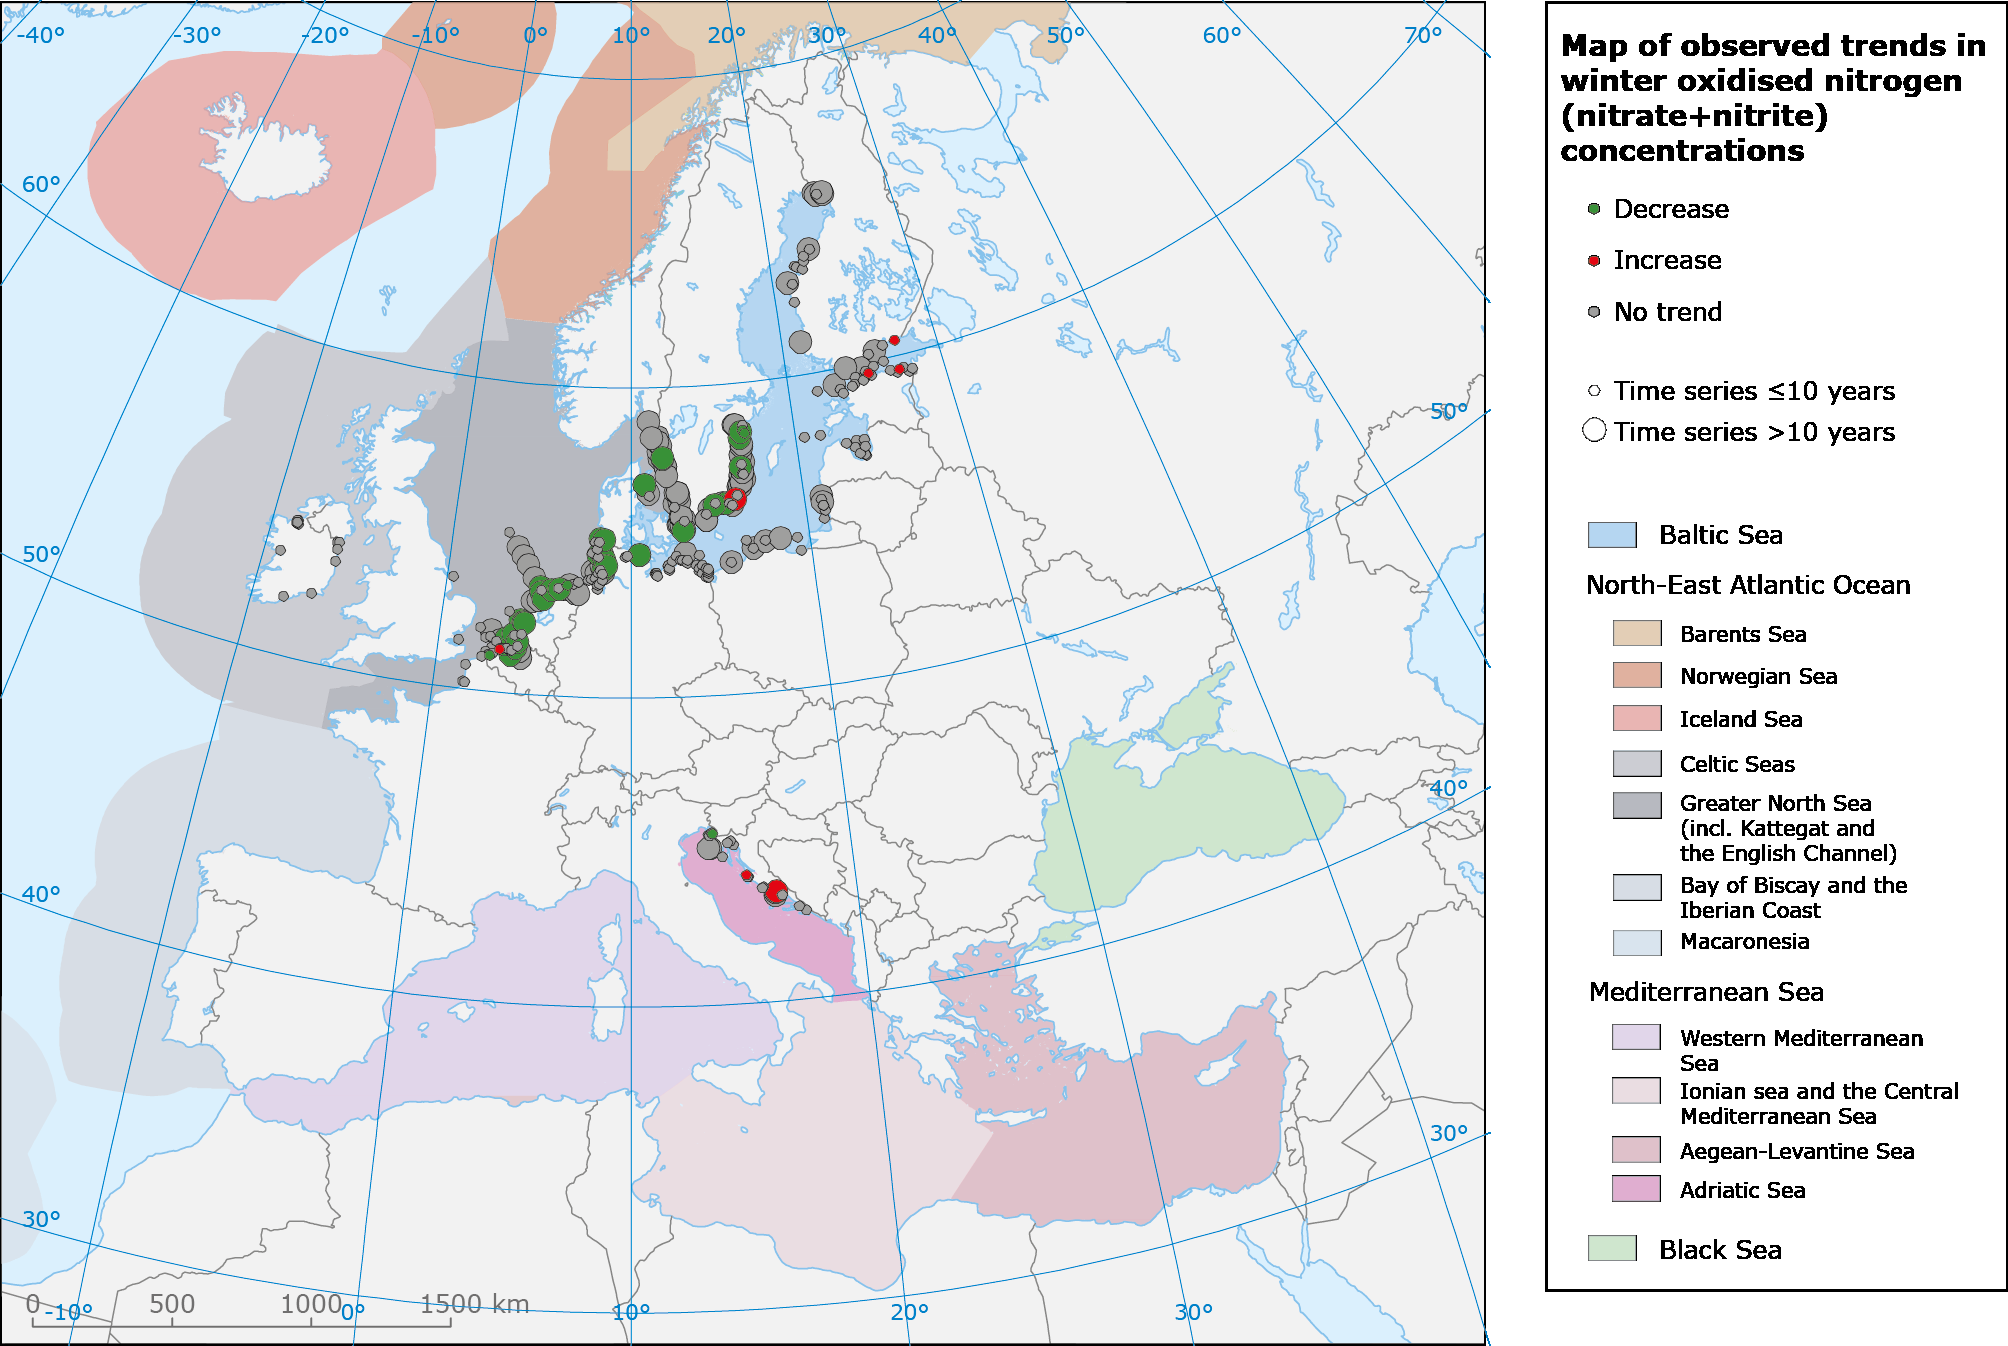 Trends per station in oxidised nitrogen concentrations in European seas